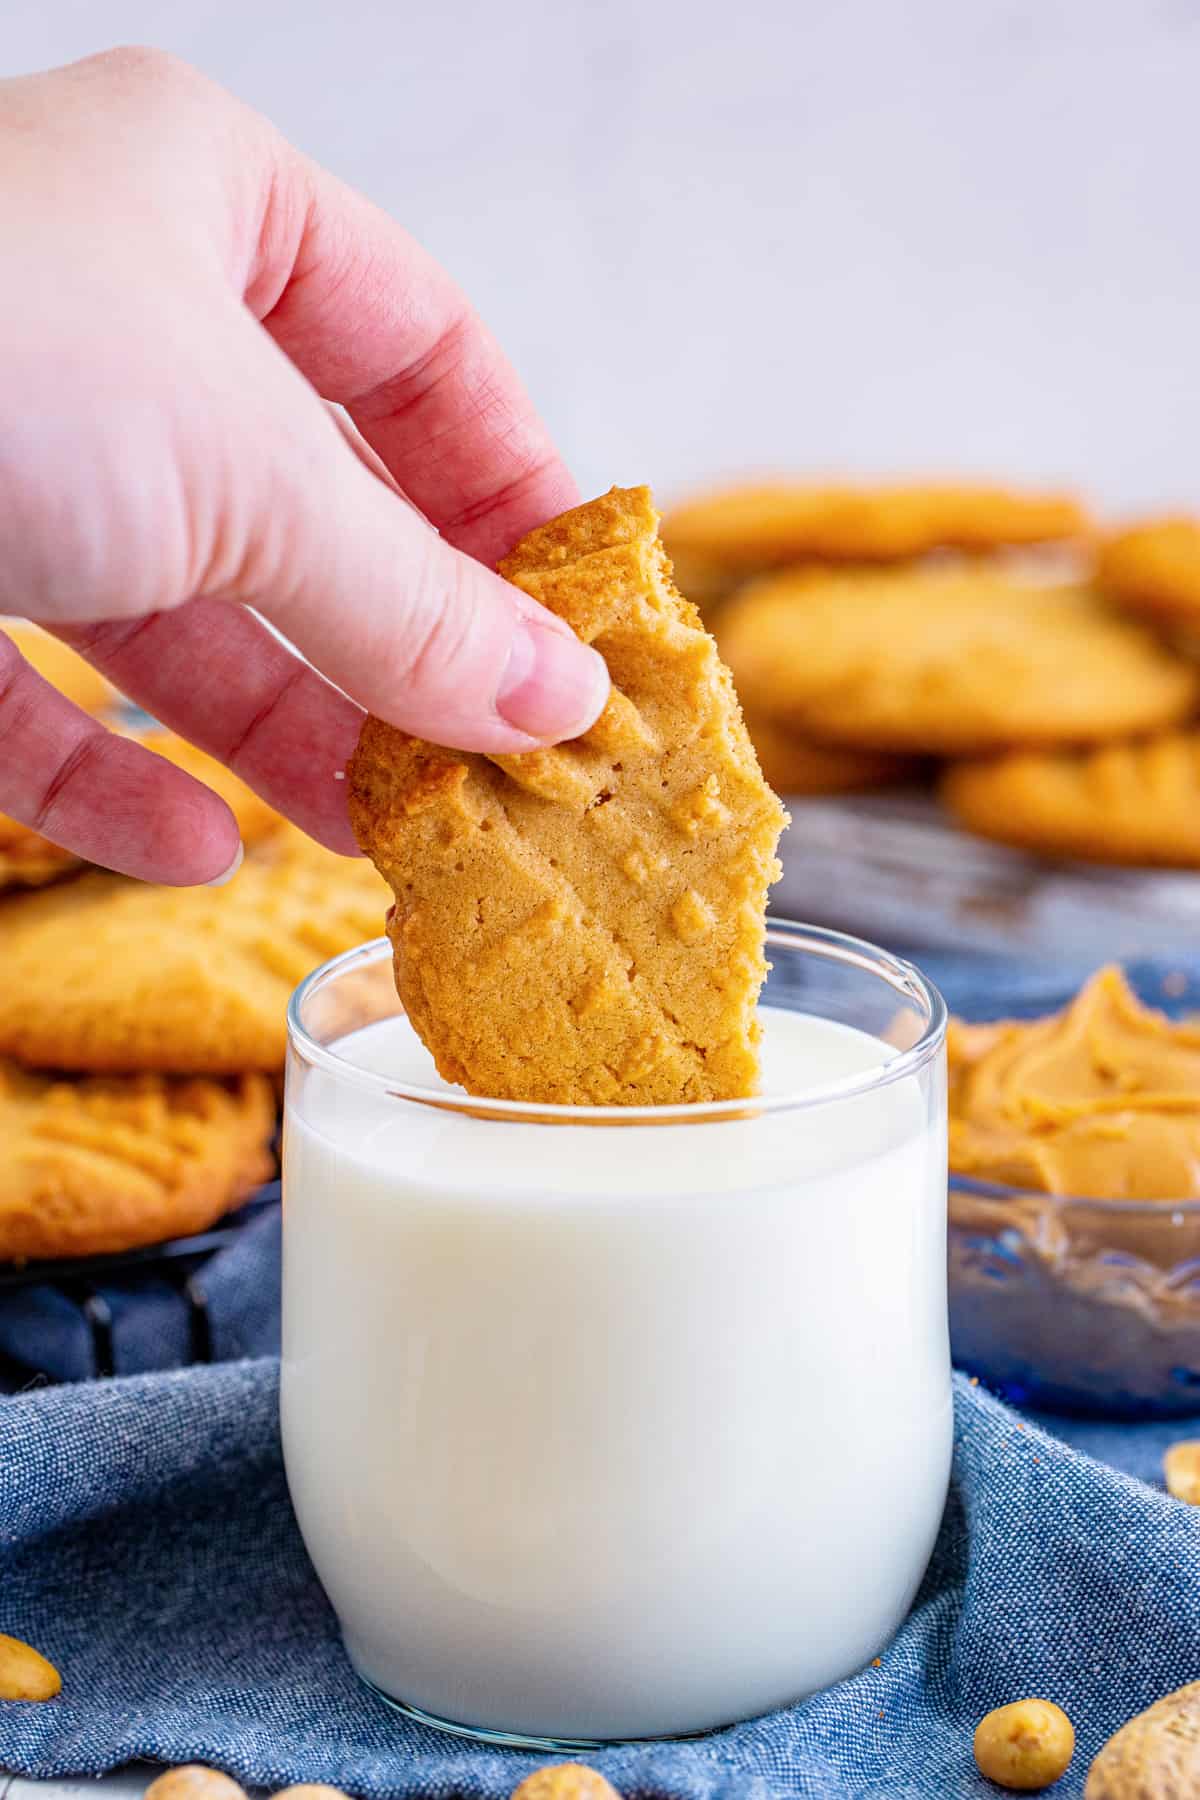 Hand dipping piece of peanut butter cookie in glass of milk.